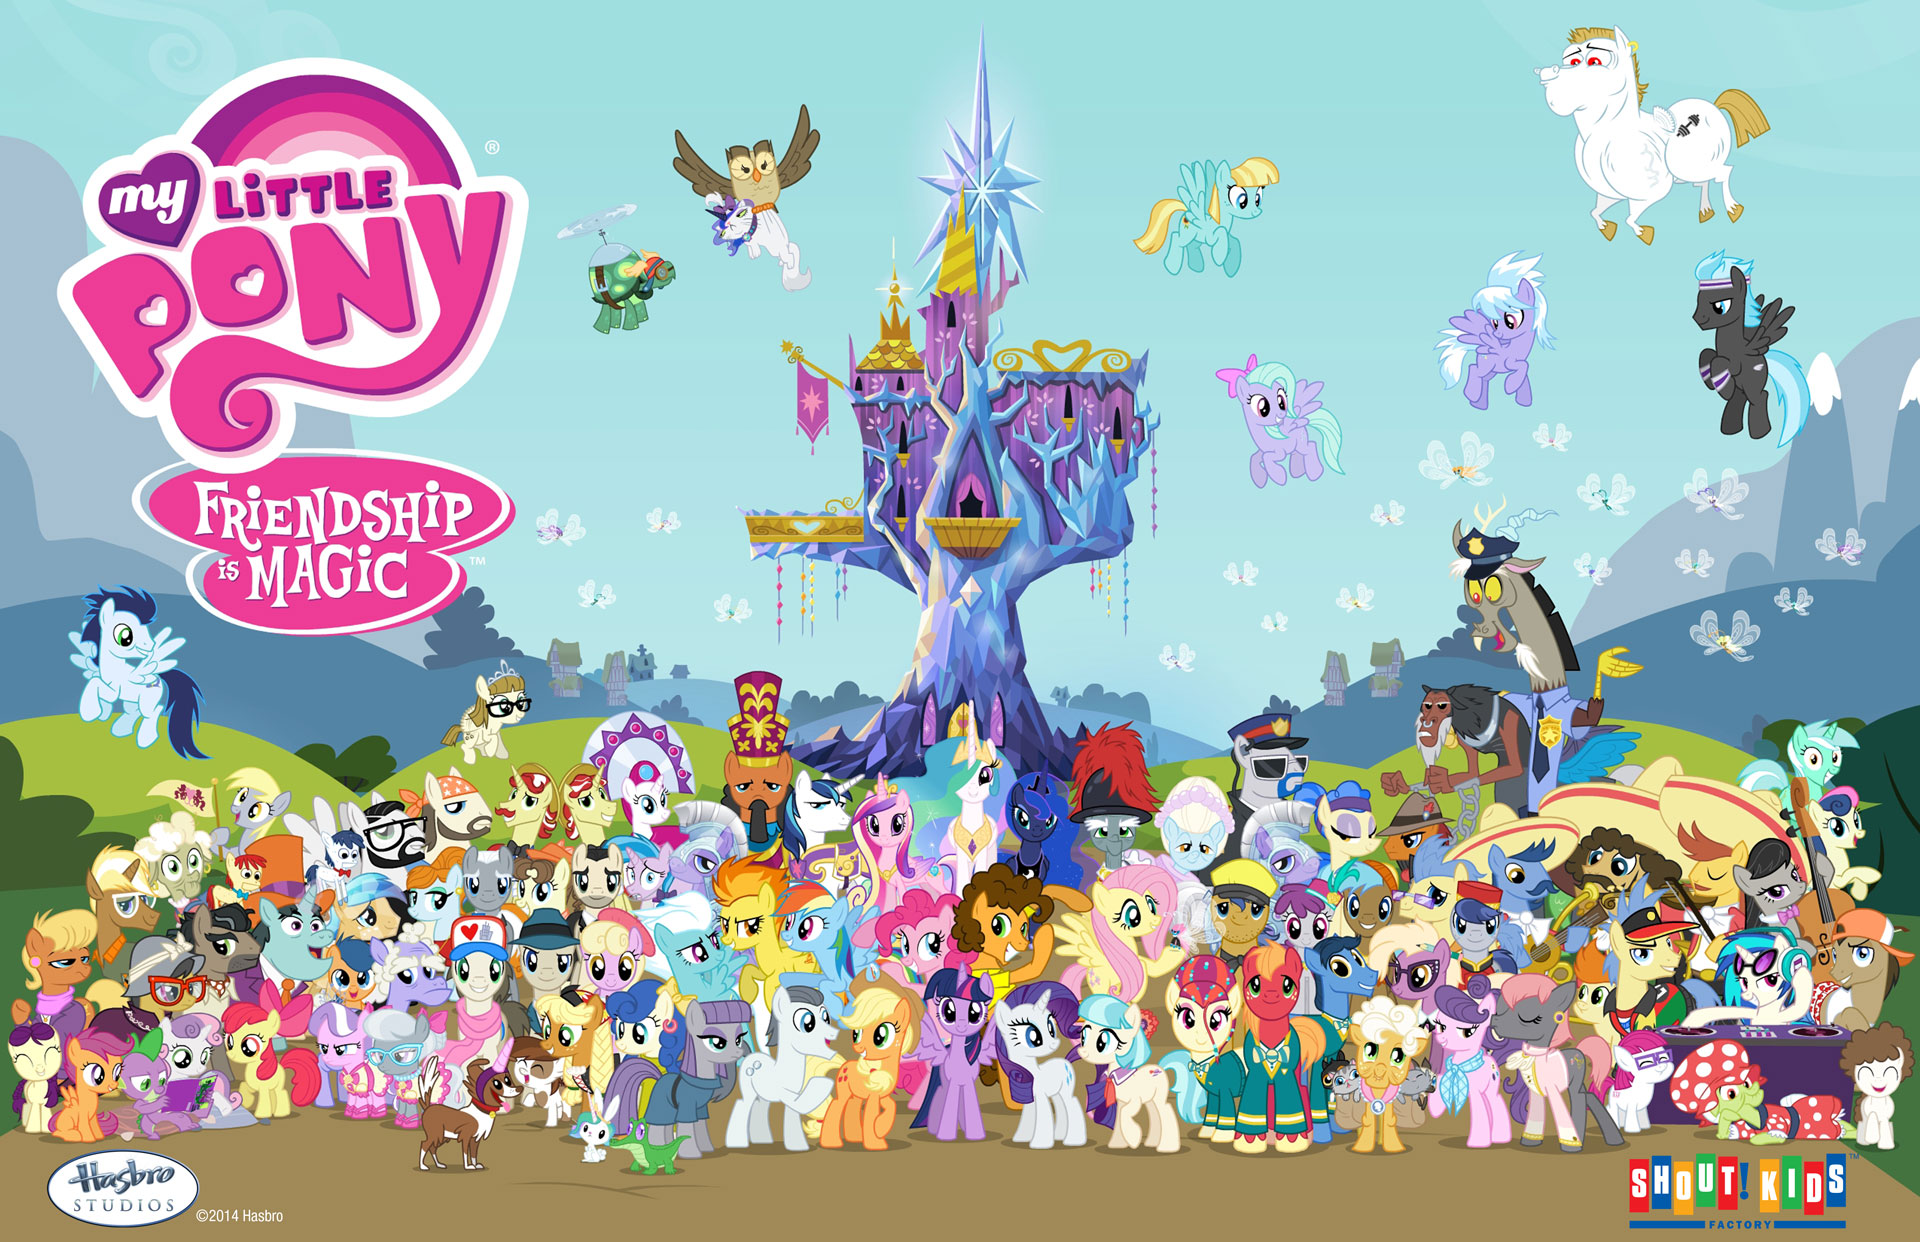 My Little Pony characters and setting -  